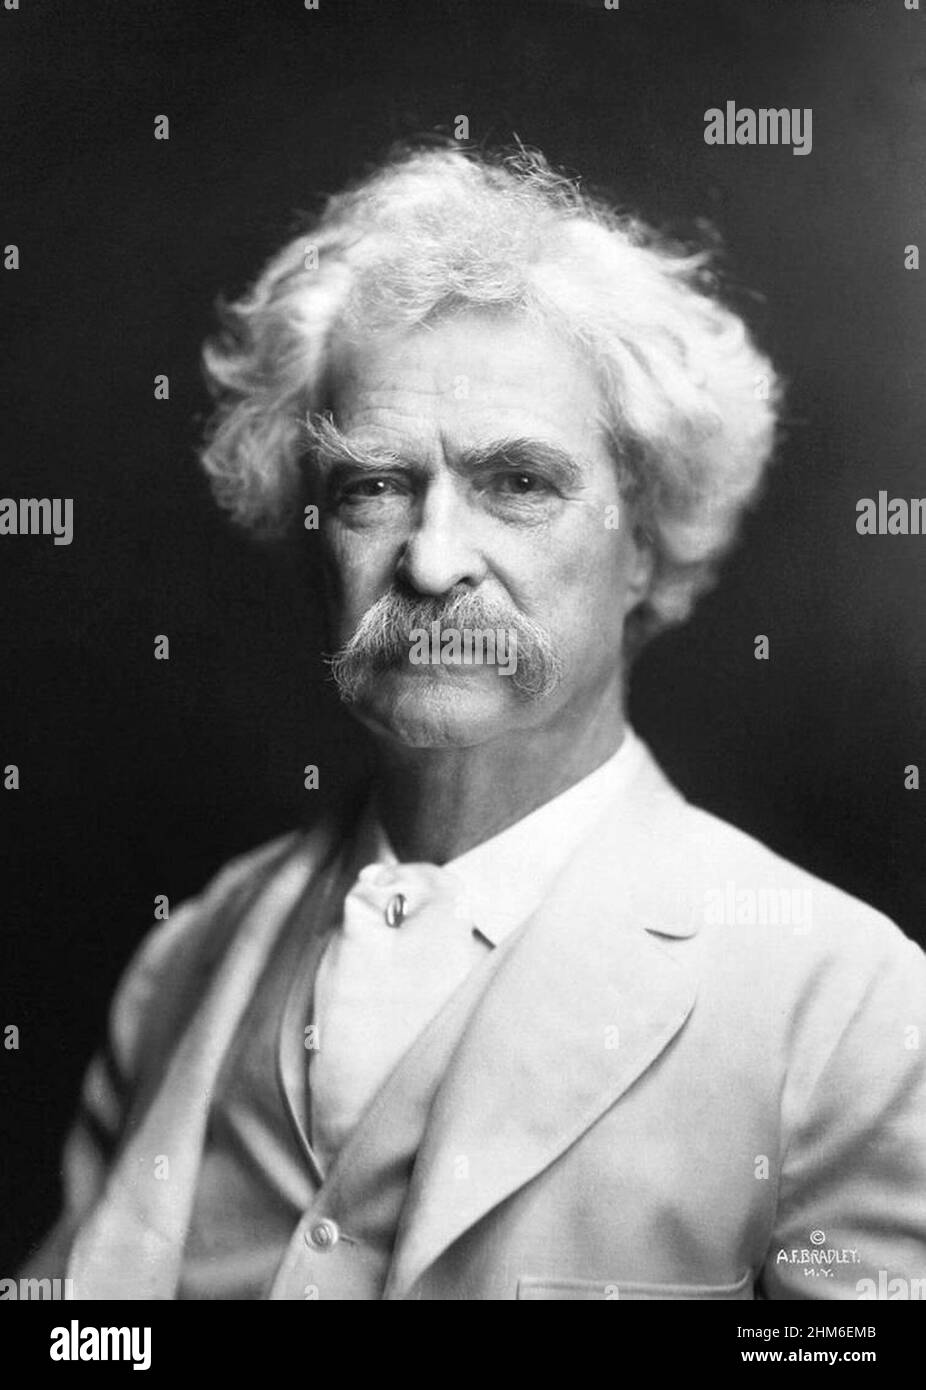 The american writer Mark Twain (real name Samuel Clemens), author of Tom Sawyer and Huckleberry Finn. Photo from 1907 when the author was 72. Stock Photo